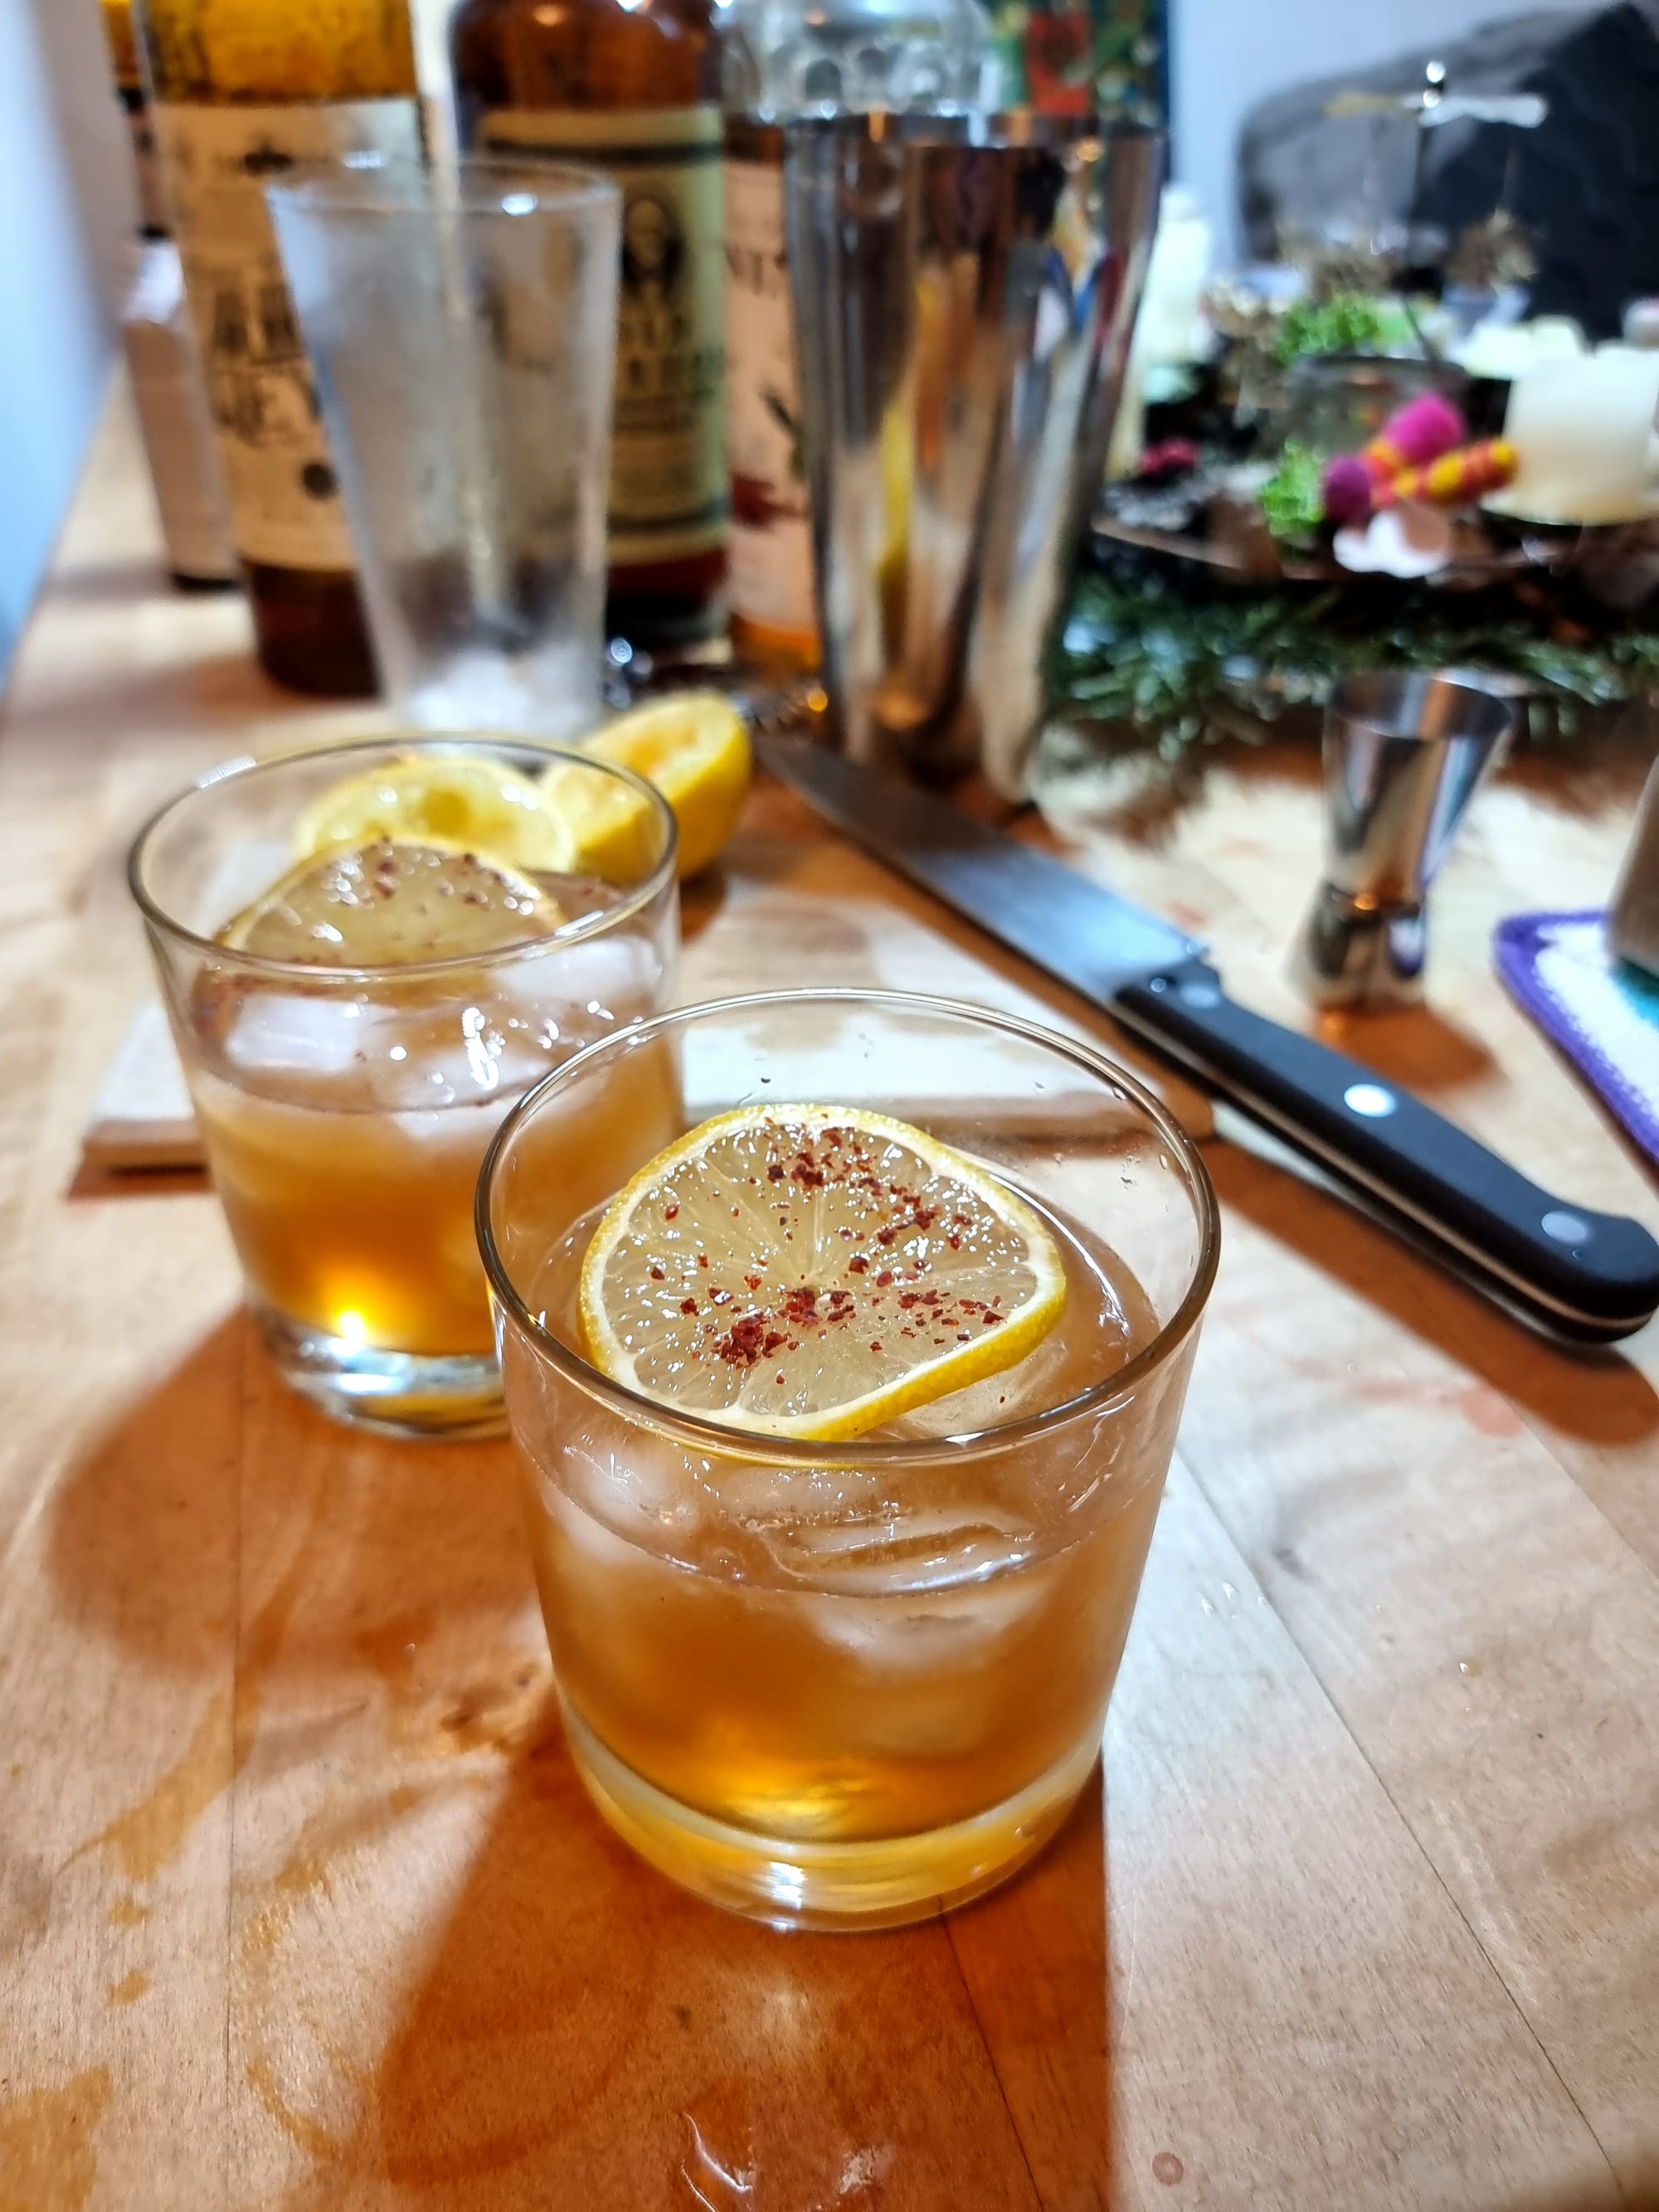 Two double old fashioned glasses, filled with a golden liquid and ice, garnished with a slice of lemon and chili flakes. In the background the usual cocktail paraphernalia.